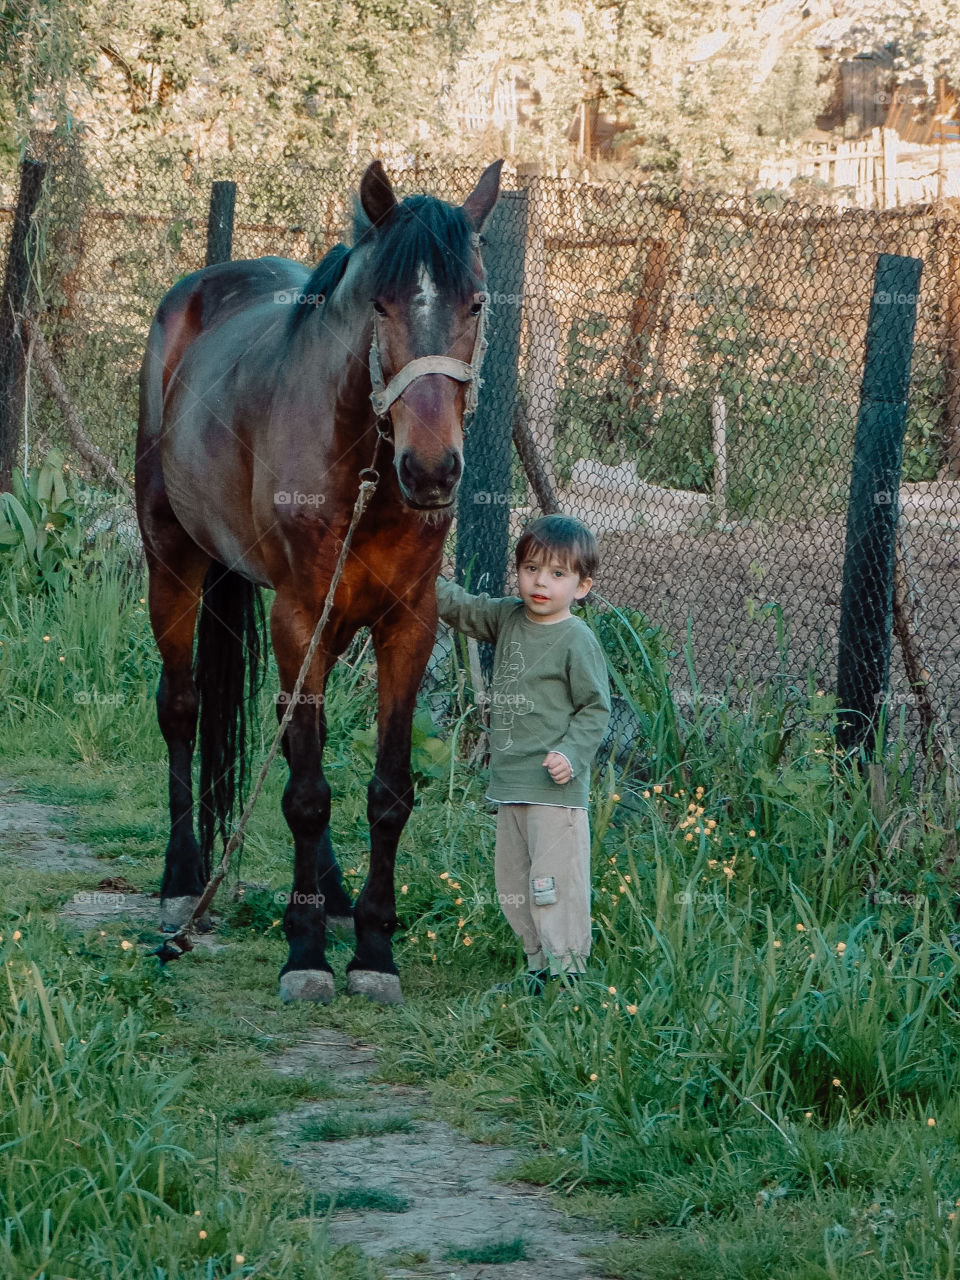 Horse and kid's